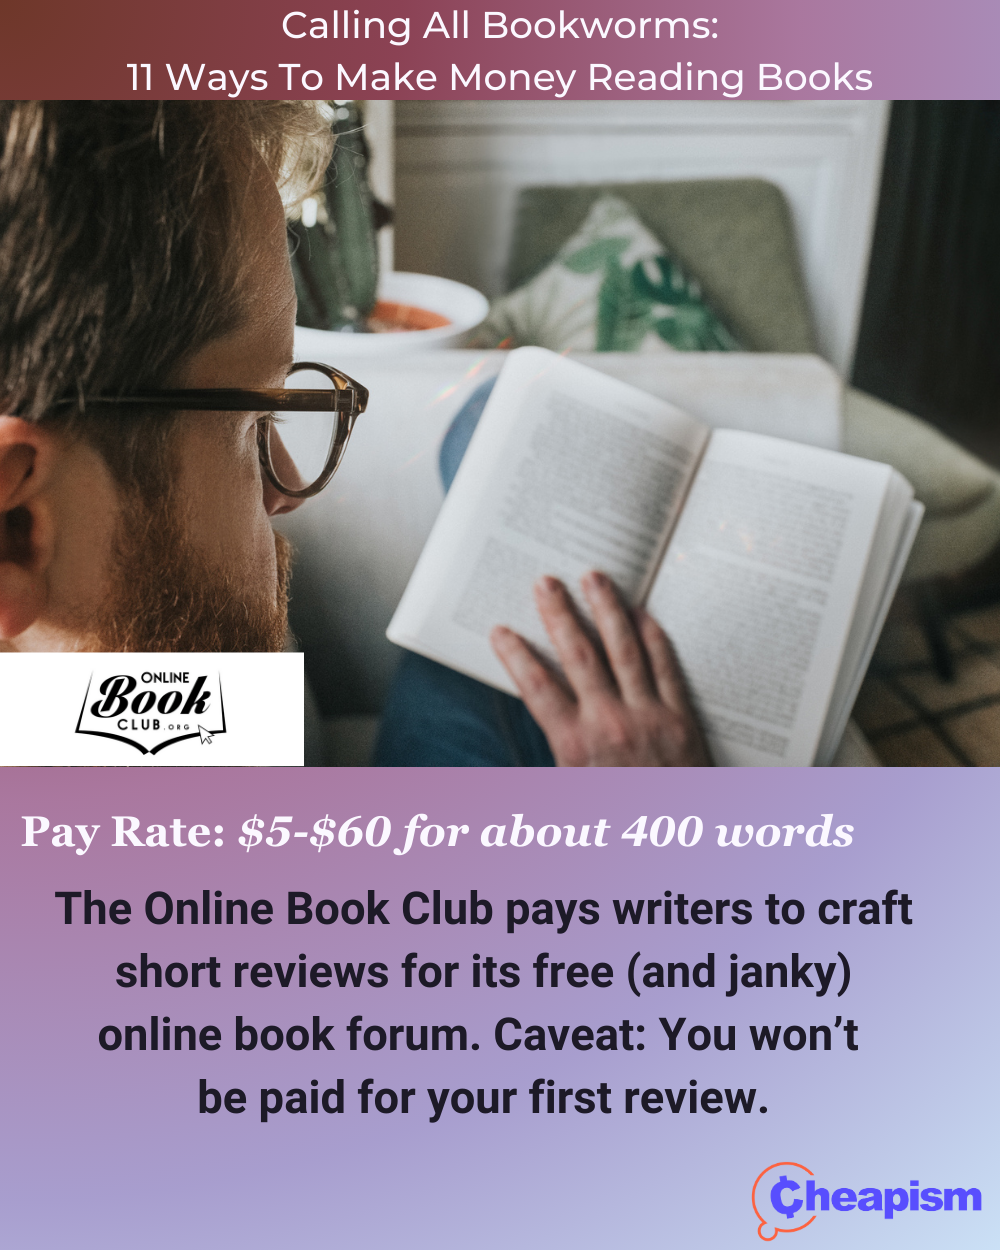 Although Online Book Club’s website looks like it hasn’t been updated since the early 2000s, others insist that it’s a real reviews site. According to writers who’ve worked for the site, you get to choose which books you critique from a list. While some reviews pay more than others, the highest-paying gigs are reserved for writers with high “reviewer scores.” But, in the own website’s words, “you won't be able to leave your day job” with the money you earn. You can <a href="https://onlinebookclub.org/free-books-for-reviews.php">sign up to be a critic here</a>.